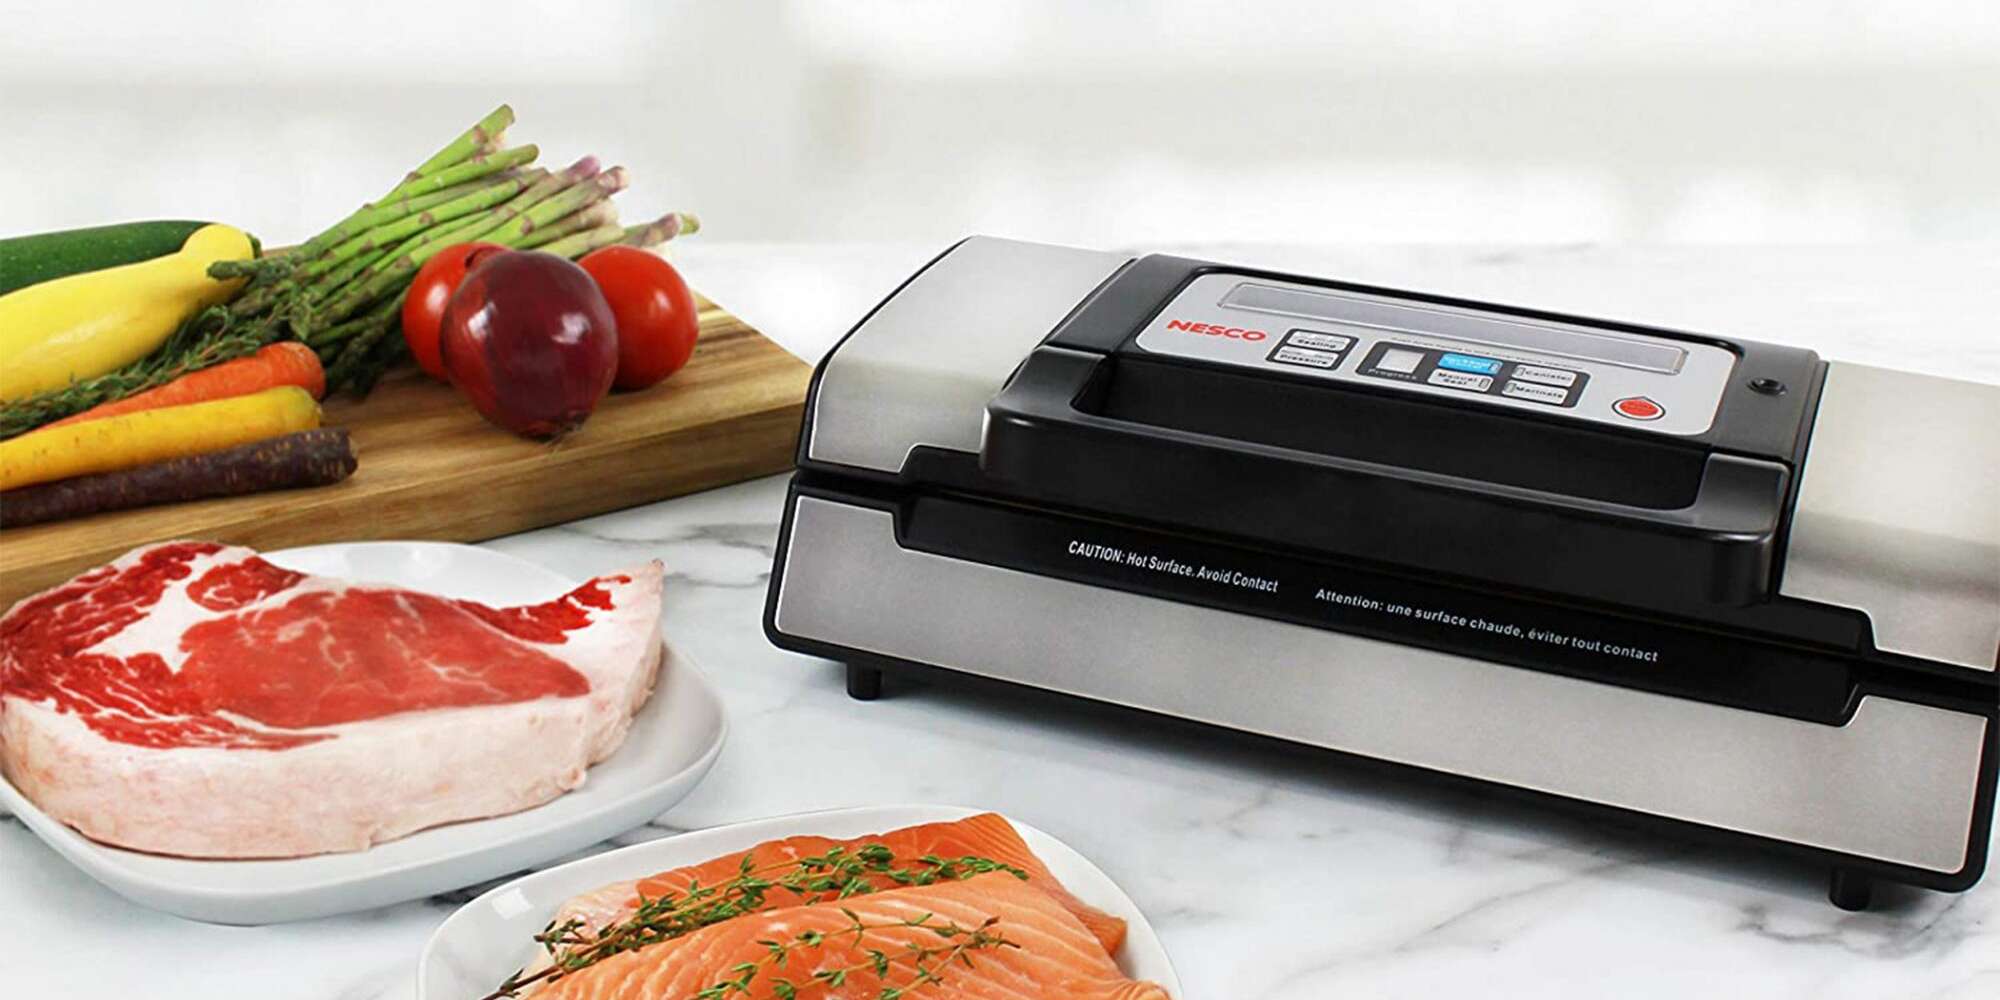 3 Big Reasons Why You Should Invest in a Vacuum Sealer This Fall